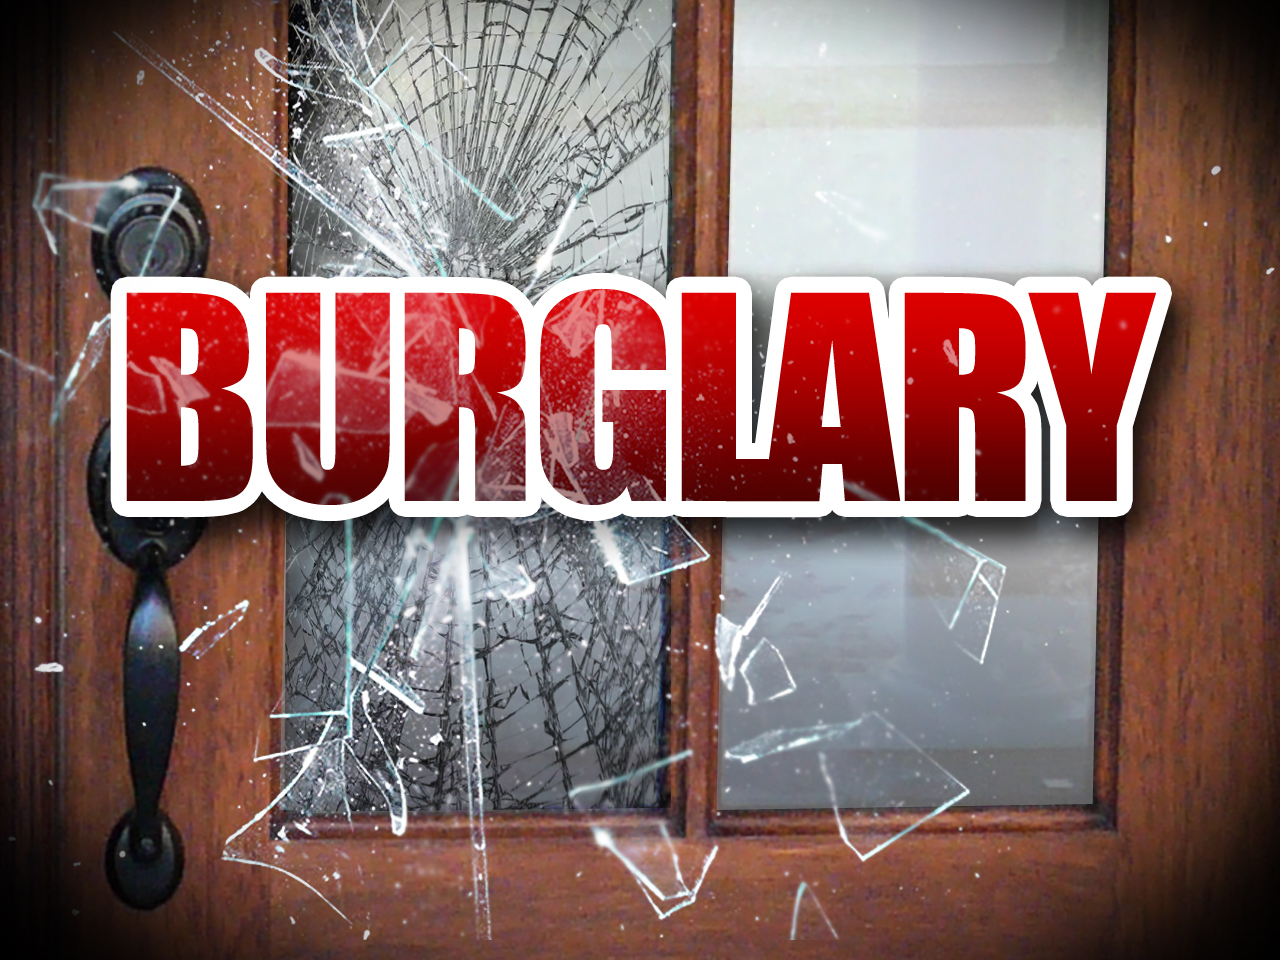 St. Croix's Tyler Canegata Allegedly Breaks Into Girlfriend's Apt ... Smashes Two Cell Phones